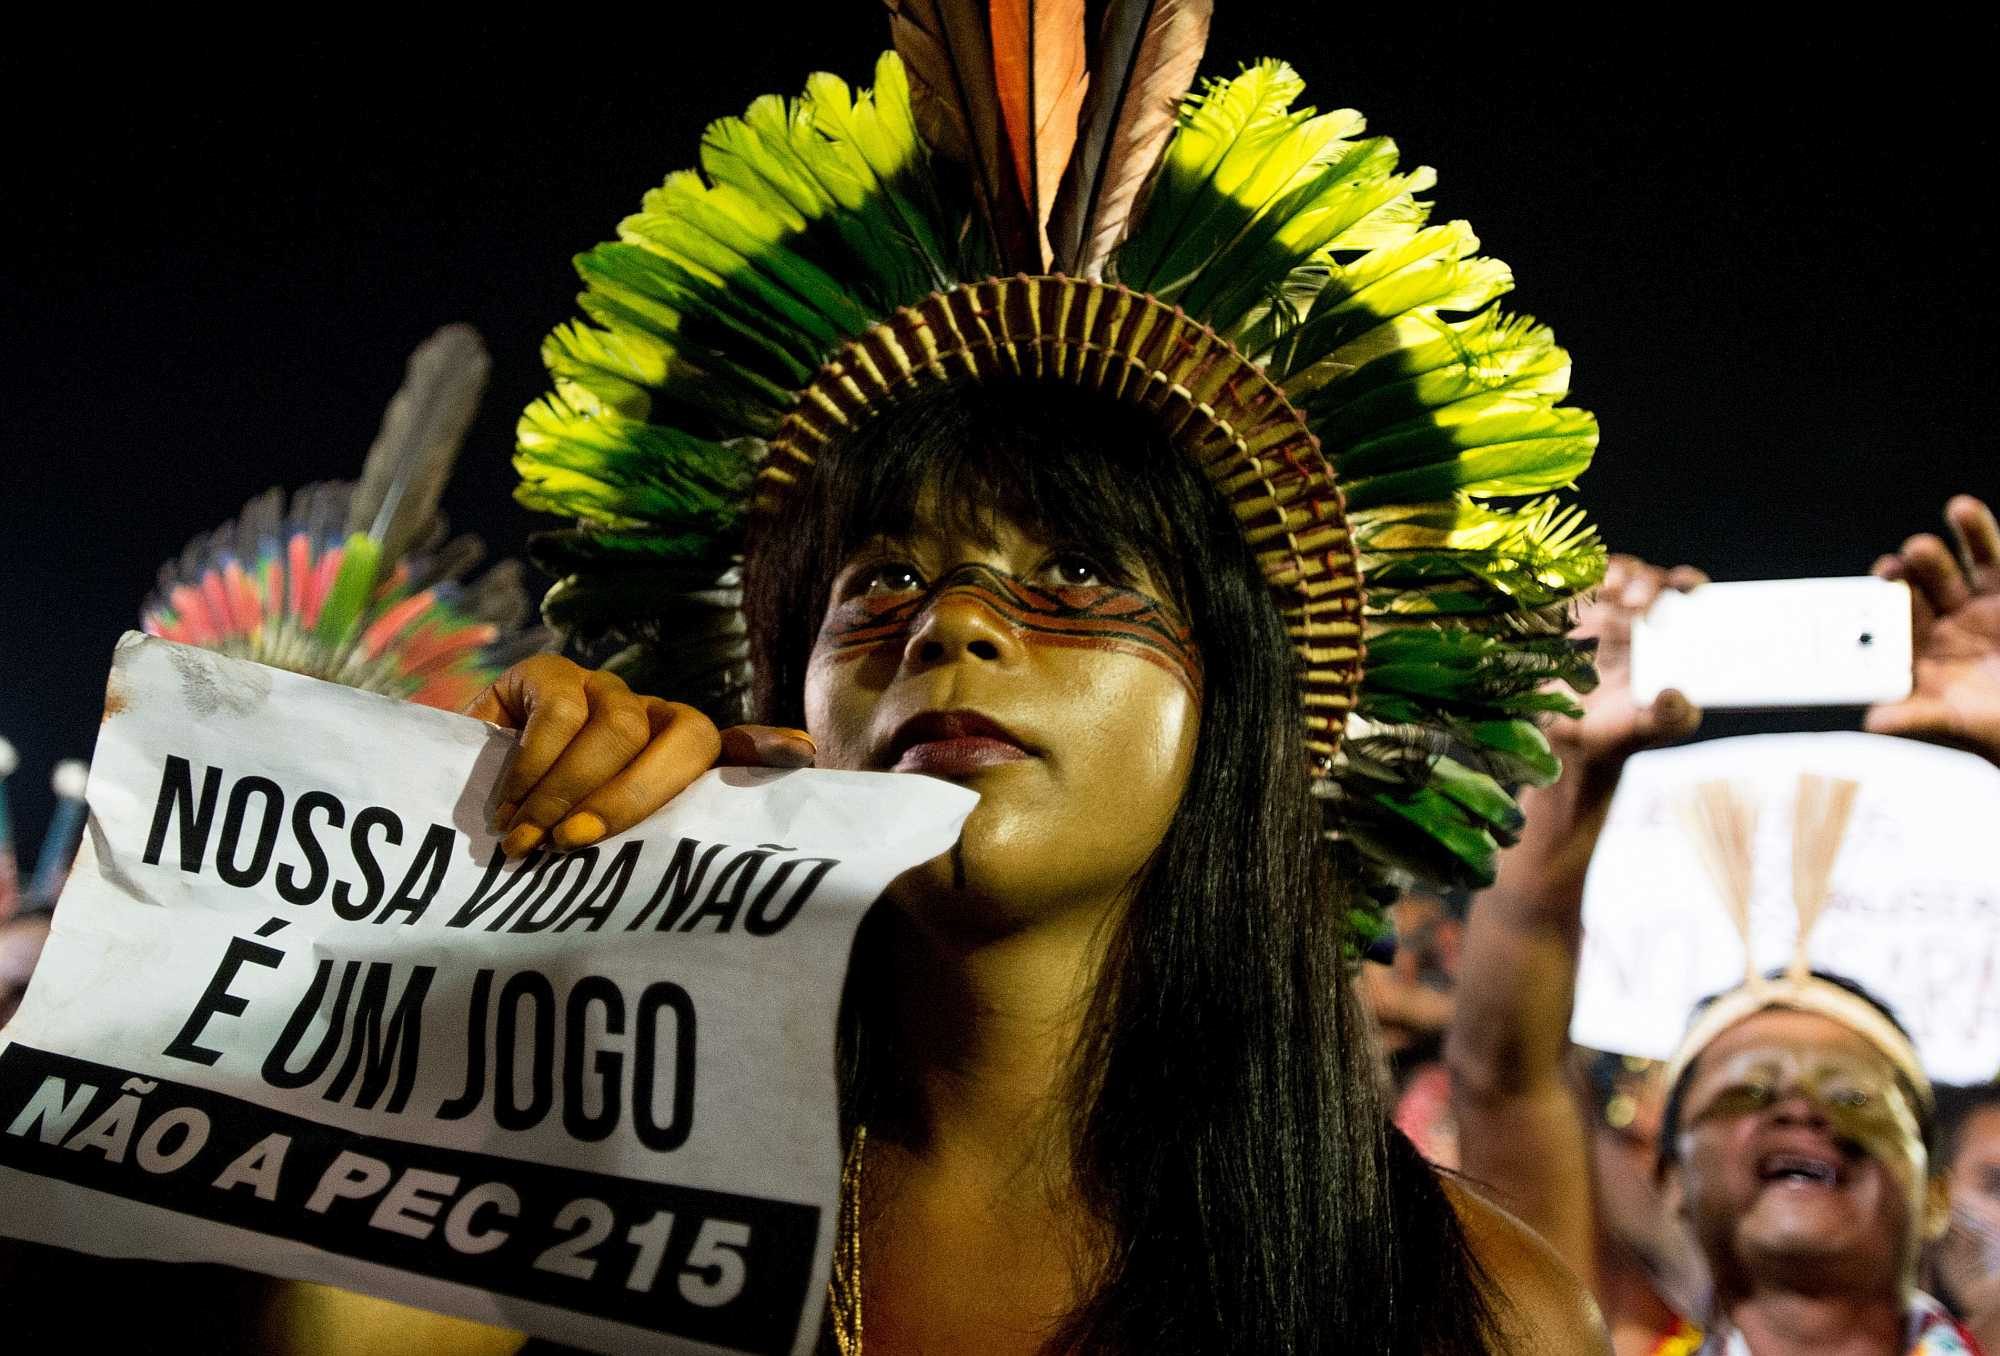 Brazilian Indians protest the way they are treated - Marcelo Camargo/ABr